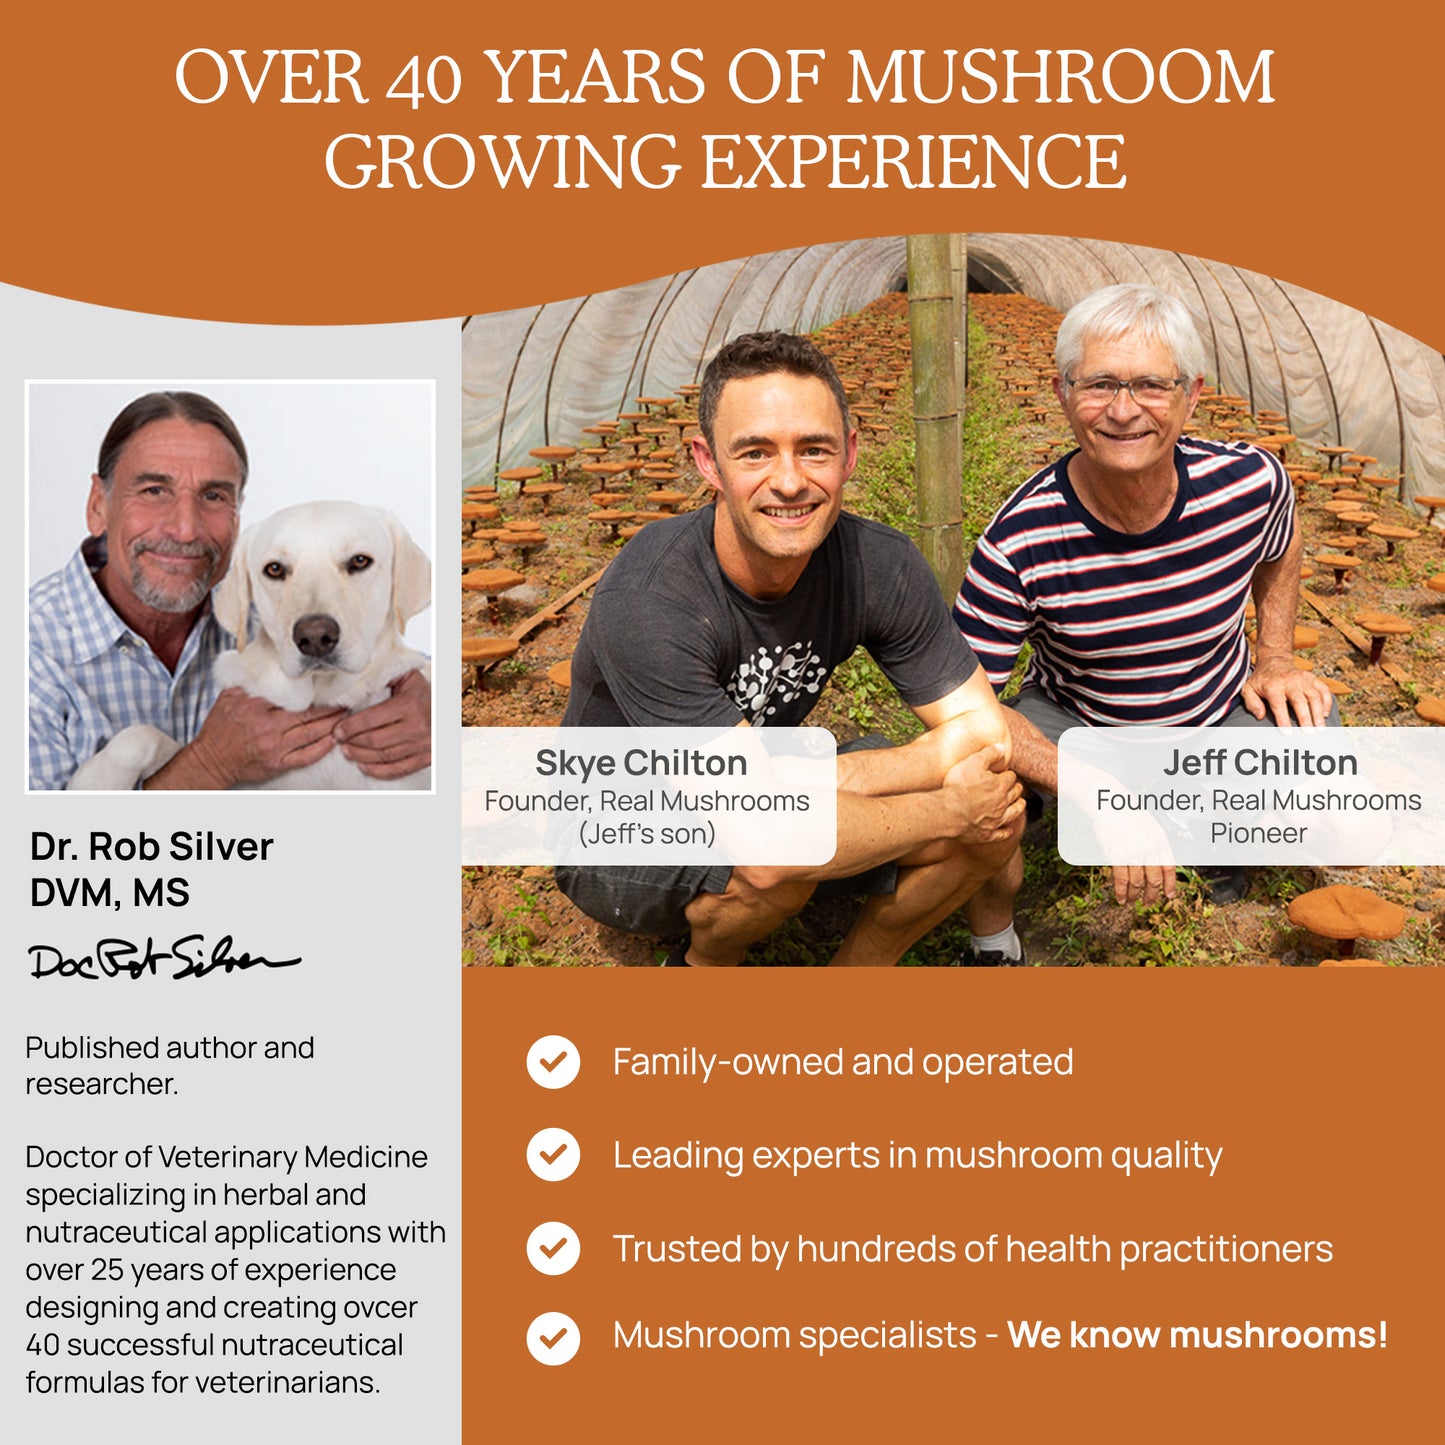 Three individuals associated with a mushroom-growing enterprise, highlighting their experience and contributions in the field of mycology and healthcare, particularly through their work with Real Mushrooms' USDA Certified Organic Cordyceps militaris.